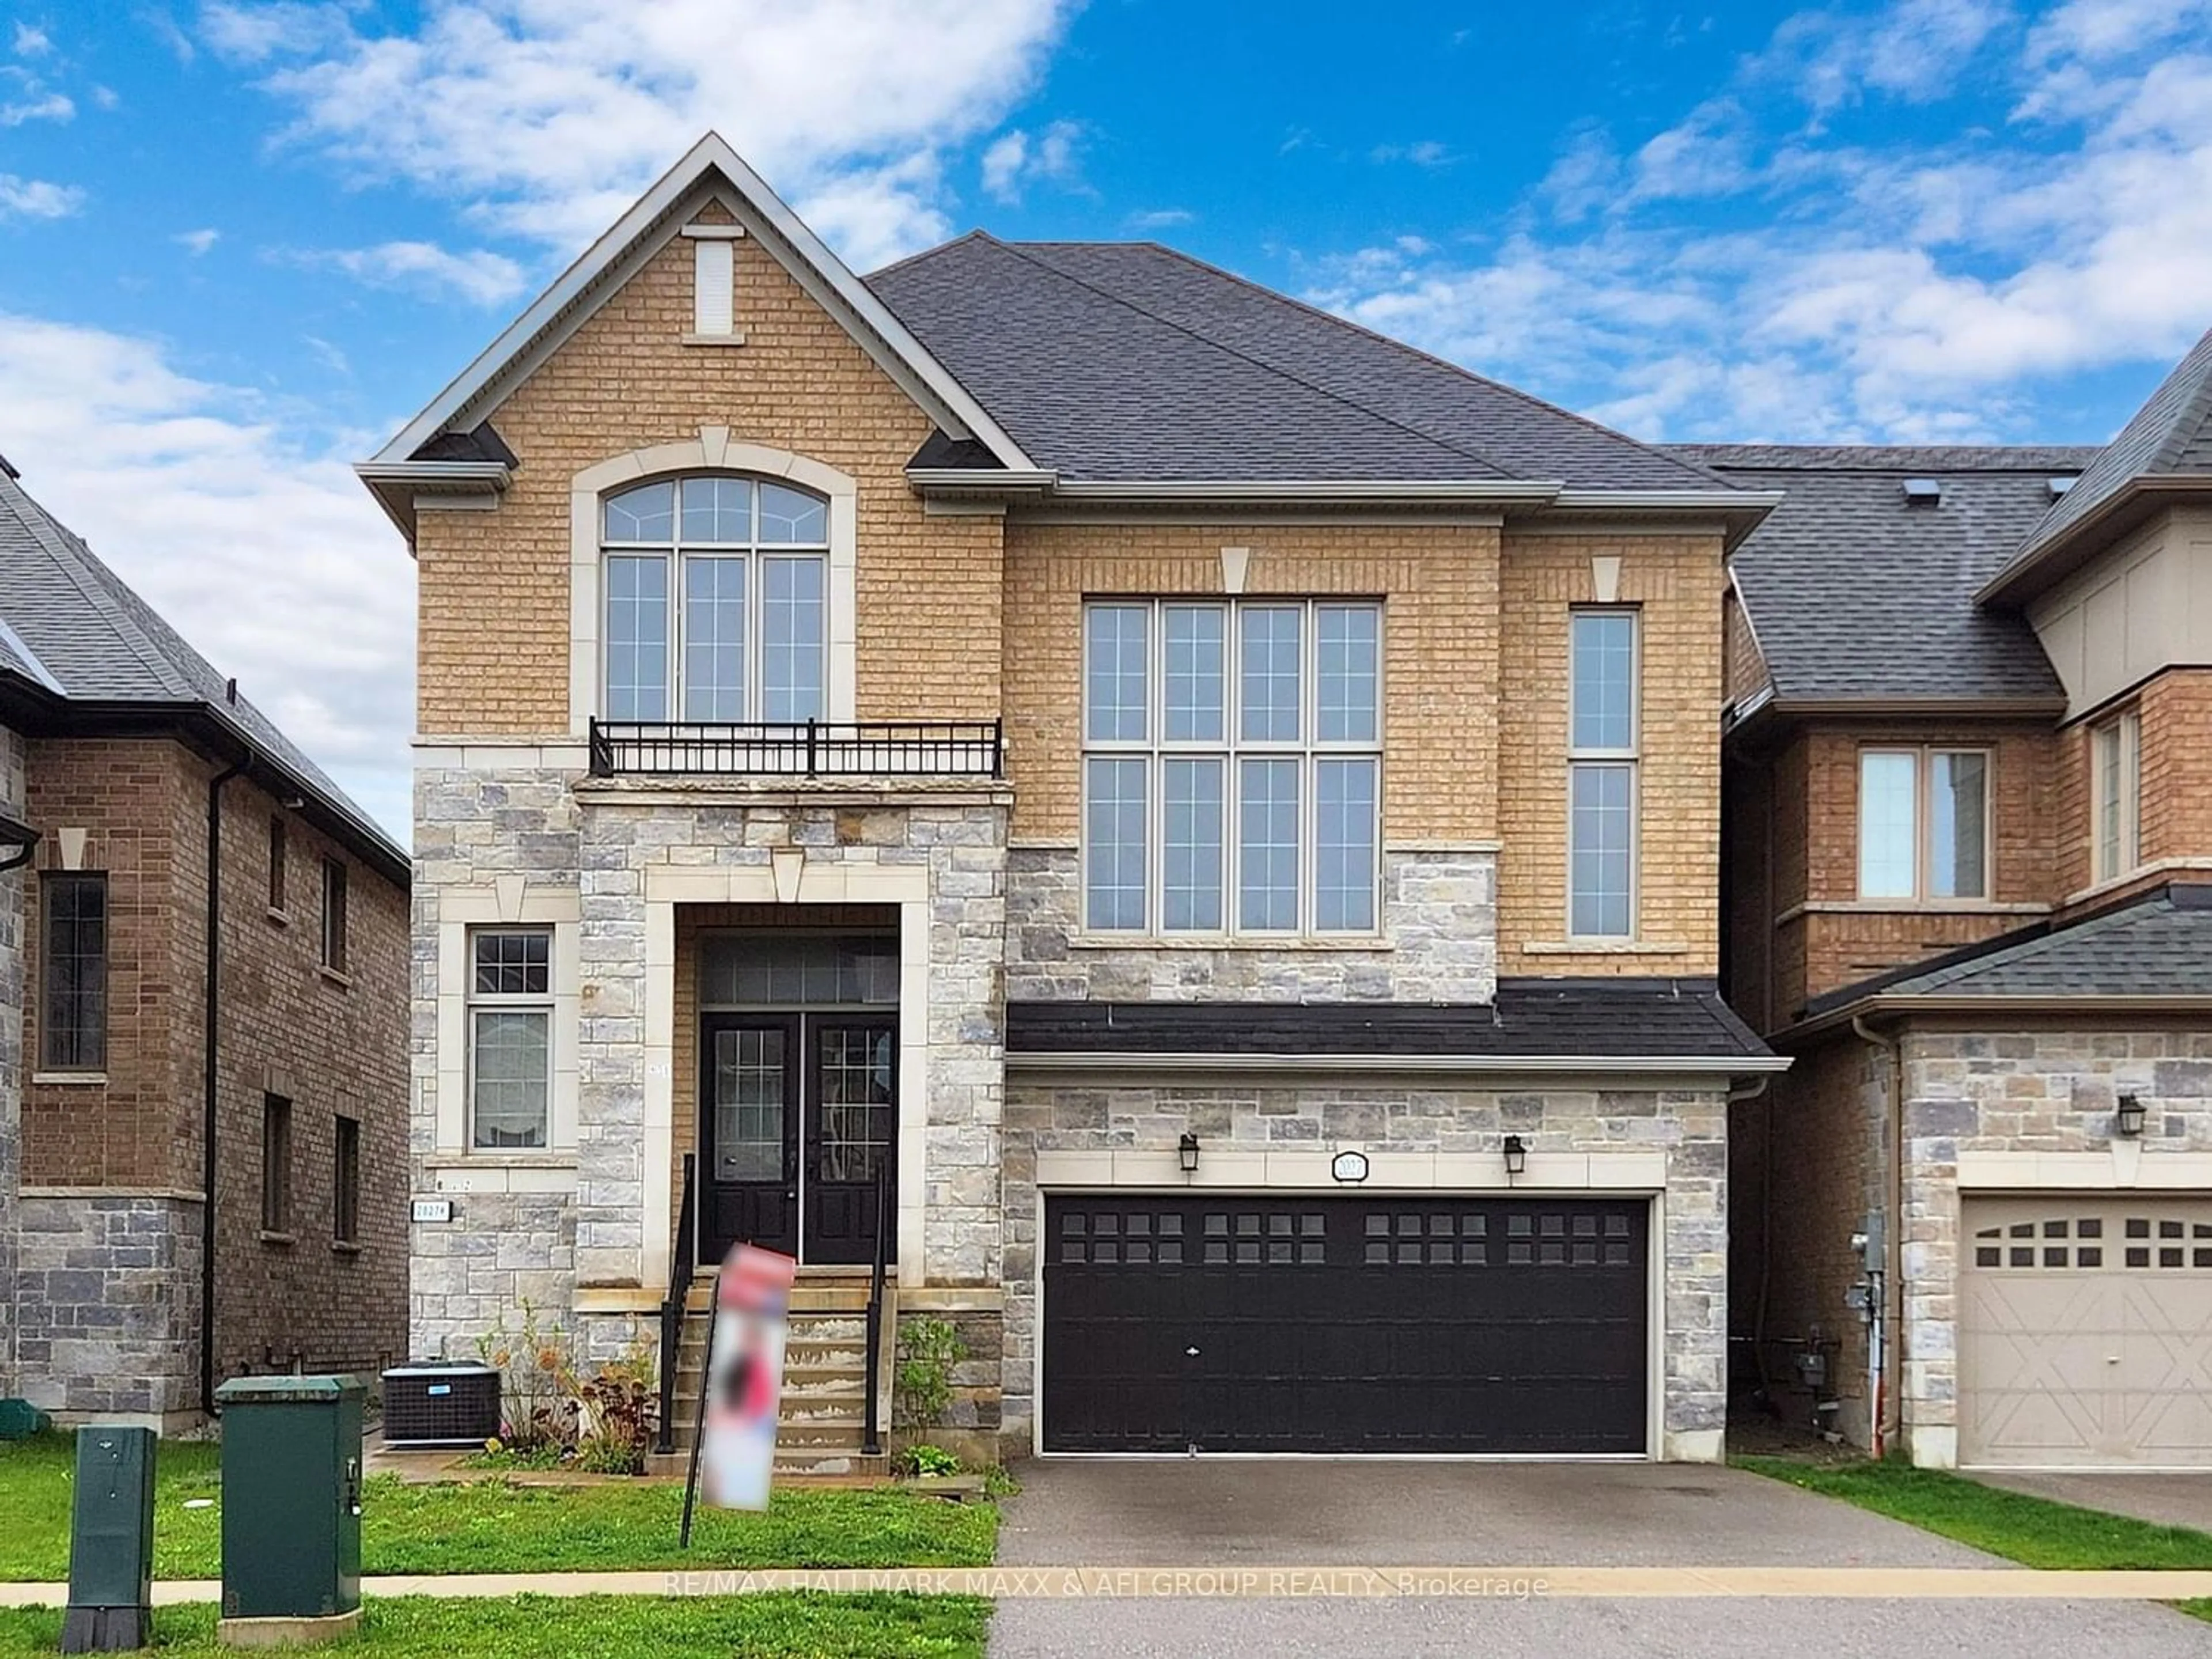 Home with brick exterior material for 2027 Webster Blvd, Innisfil Ontario L9S 0J8